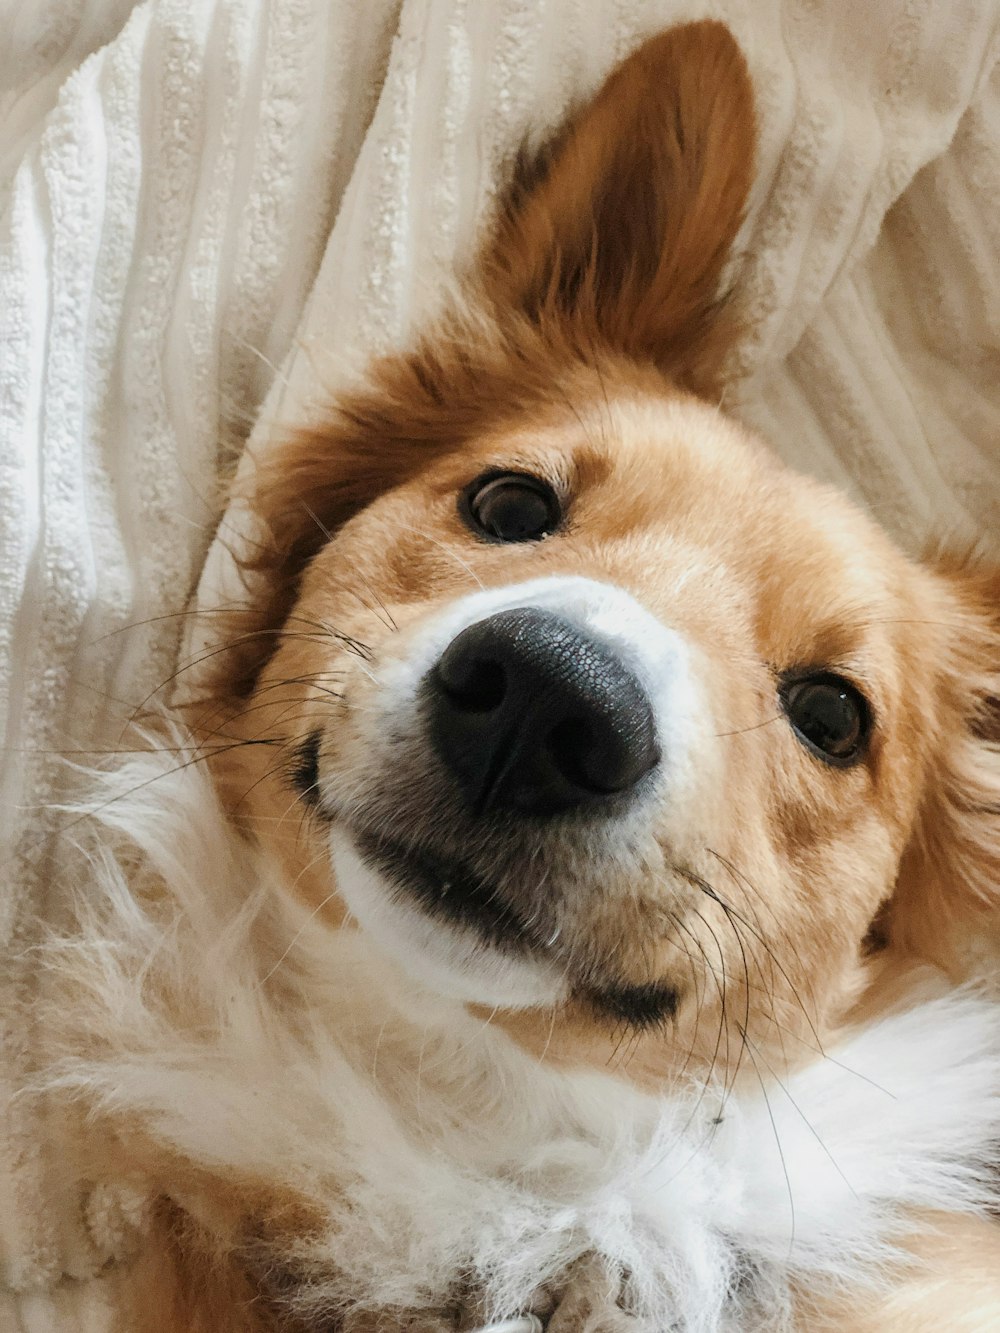 500+ Cute Dog Pictures [HD] | Download Free Images on Unsplash